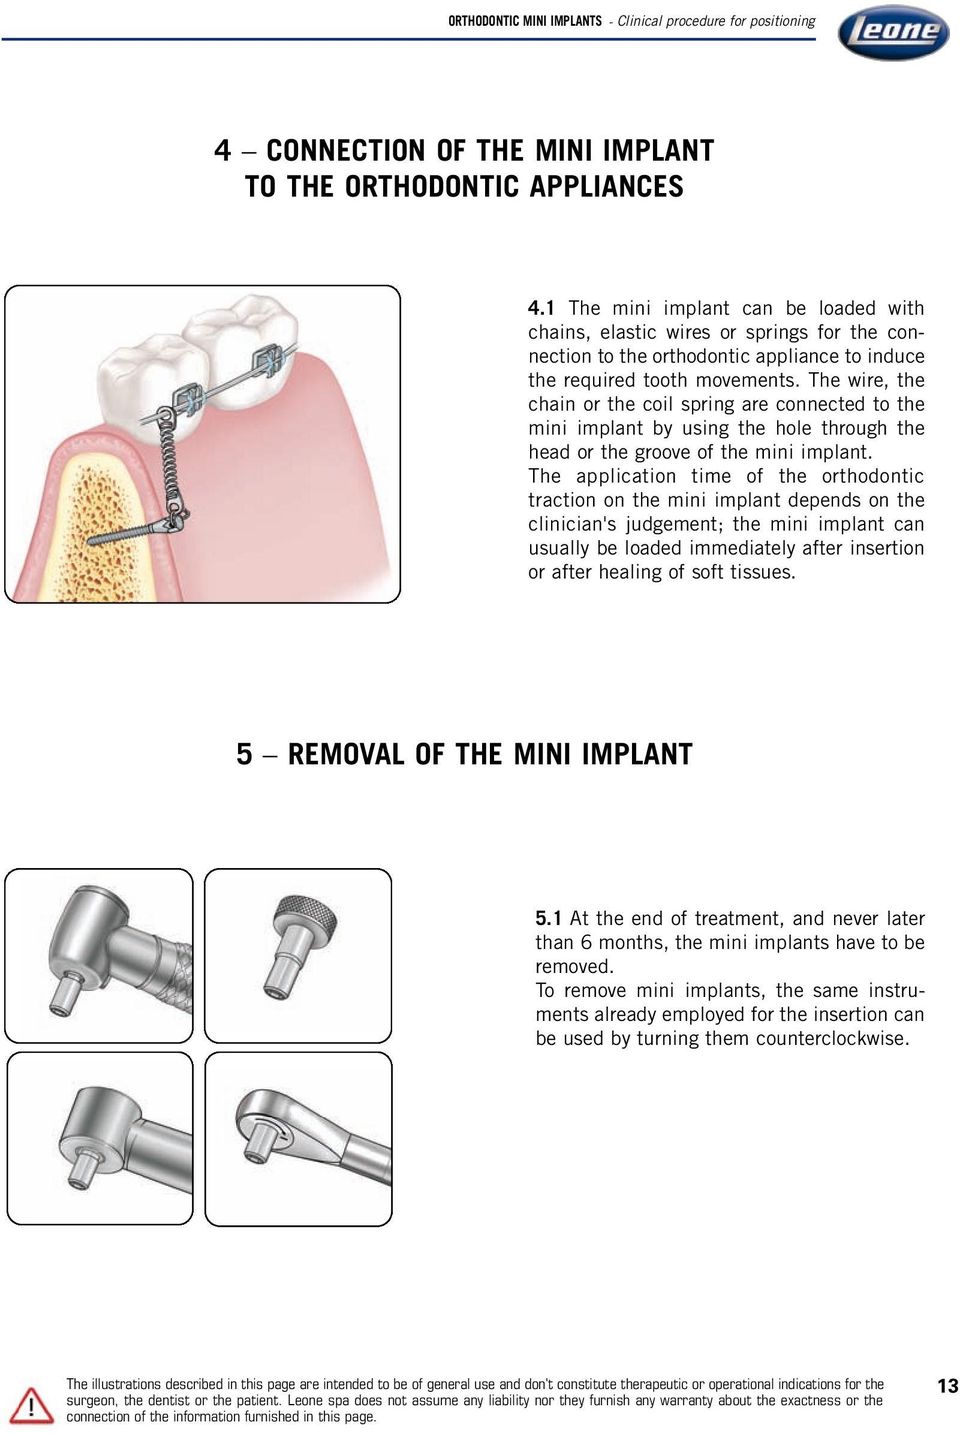 The wire, the chain or the coil spring are connected to the mini implant by using the hole through the head or the groove of the mini implant.